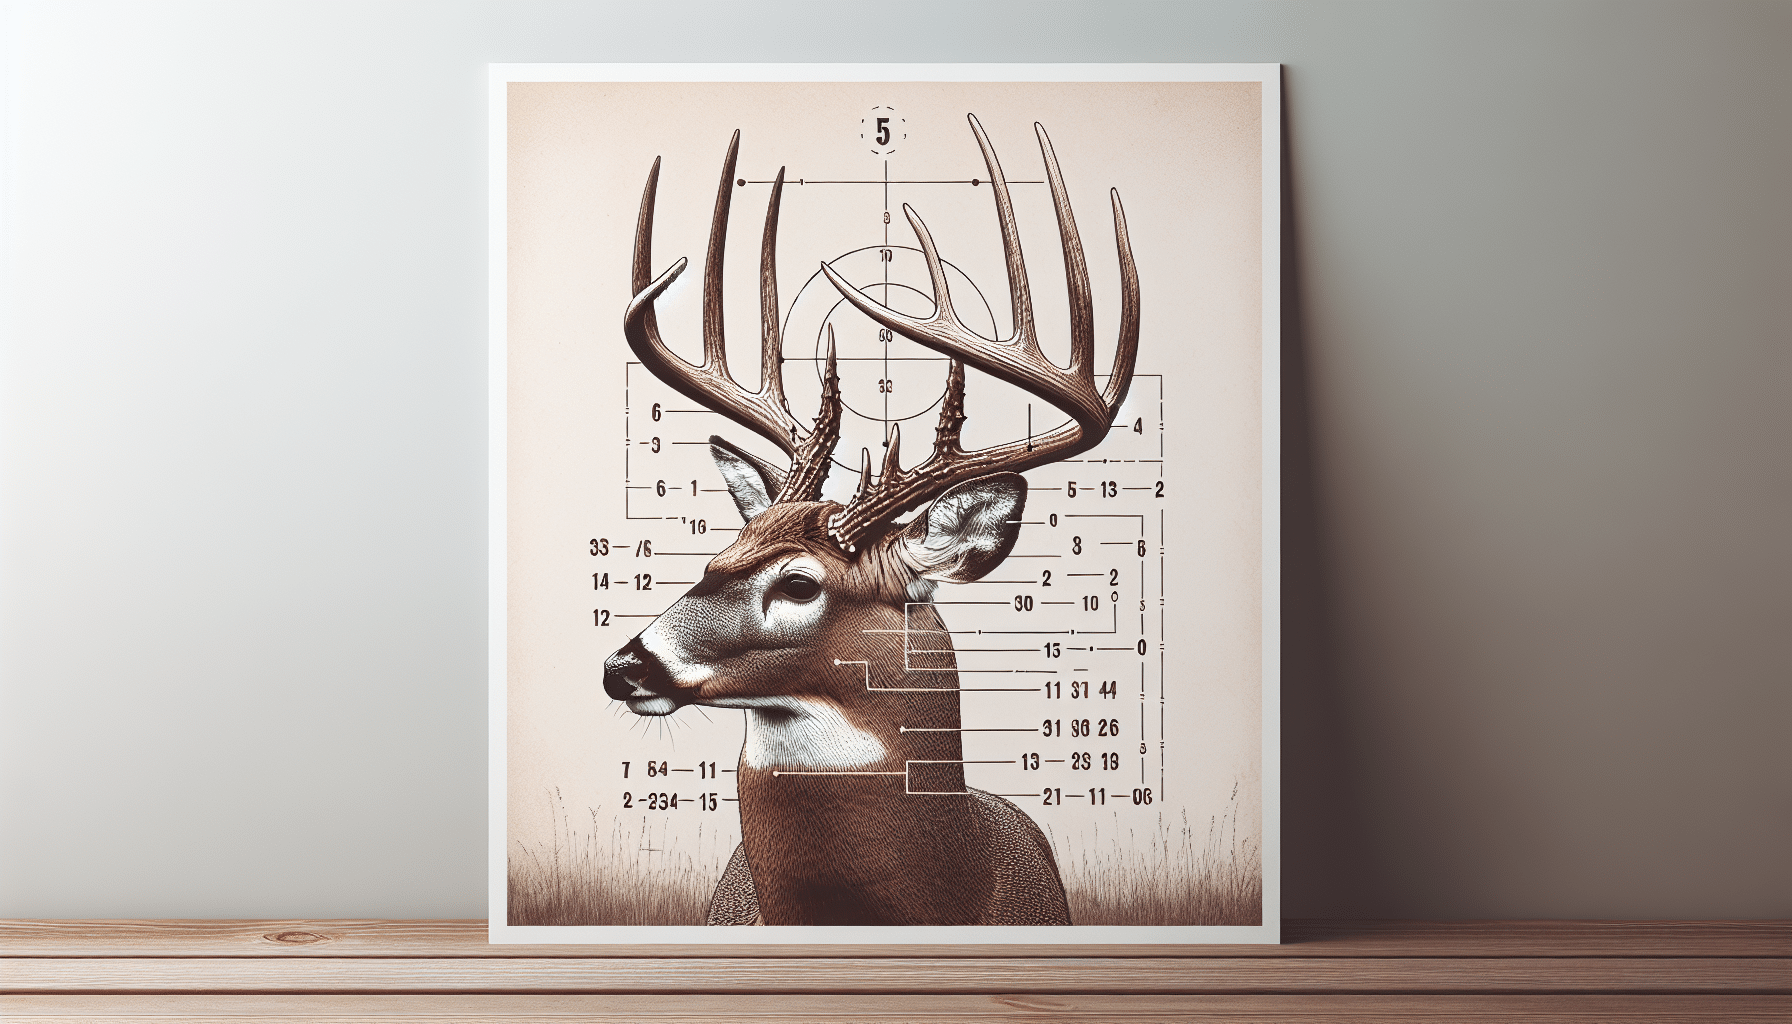 Create an image with a visual representation of how to count points on a buck. The scene should include a close-up view of a mature buck or antlered deer facing to the side, allowing for clear observation of its antler points. Design a separate, slightly faded section in the image indicating the counting process, possibly with numbers next to each point of the antler. No people, text, logos or trademarks should be visible within the image.